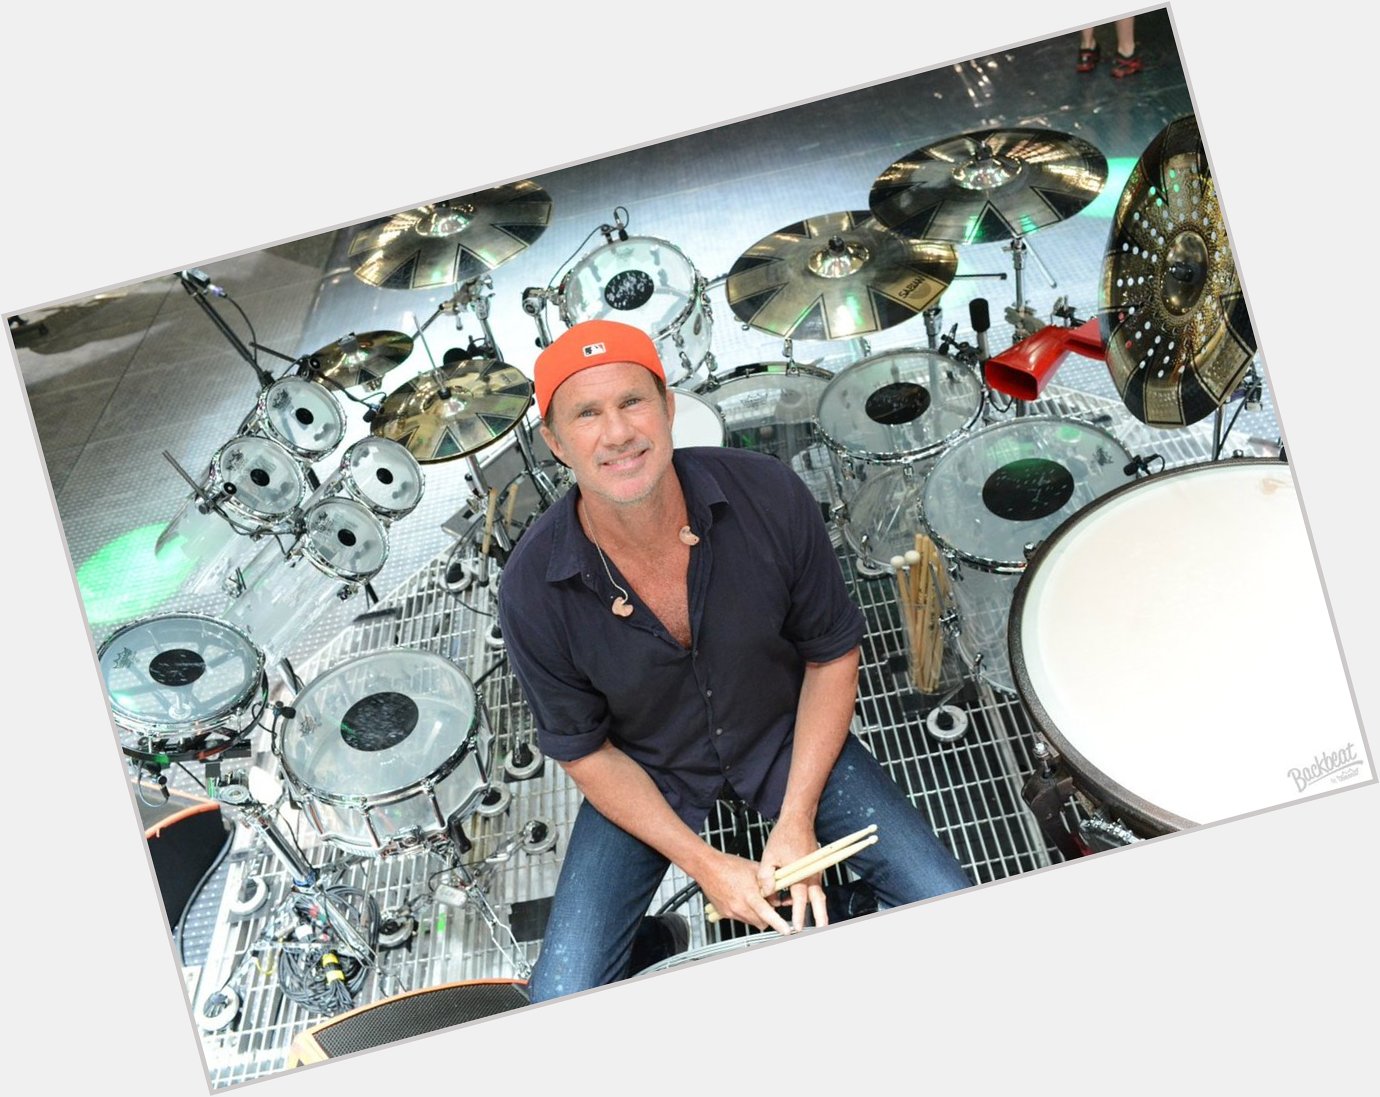 Happy birthday to Chad Smith of Red Hot Chili Peppers!   